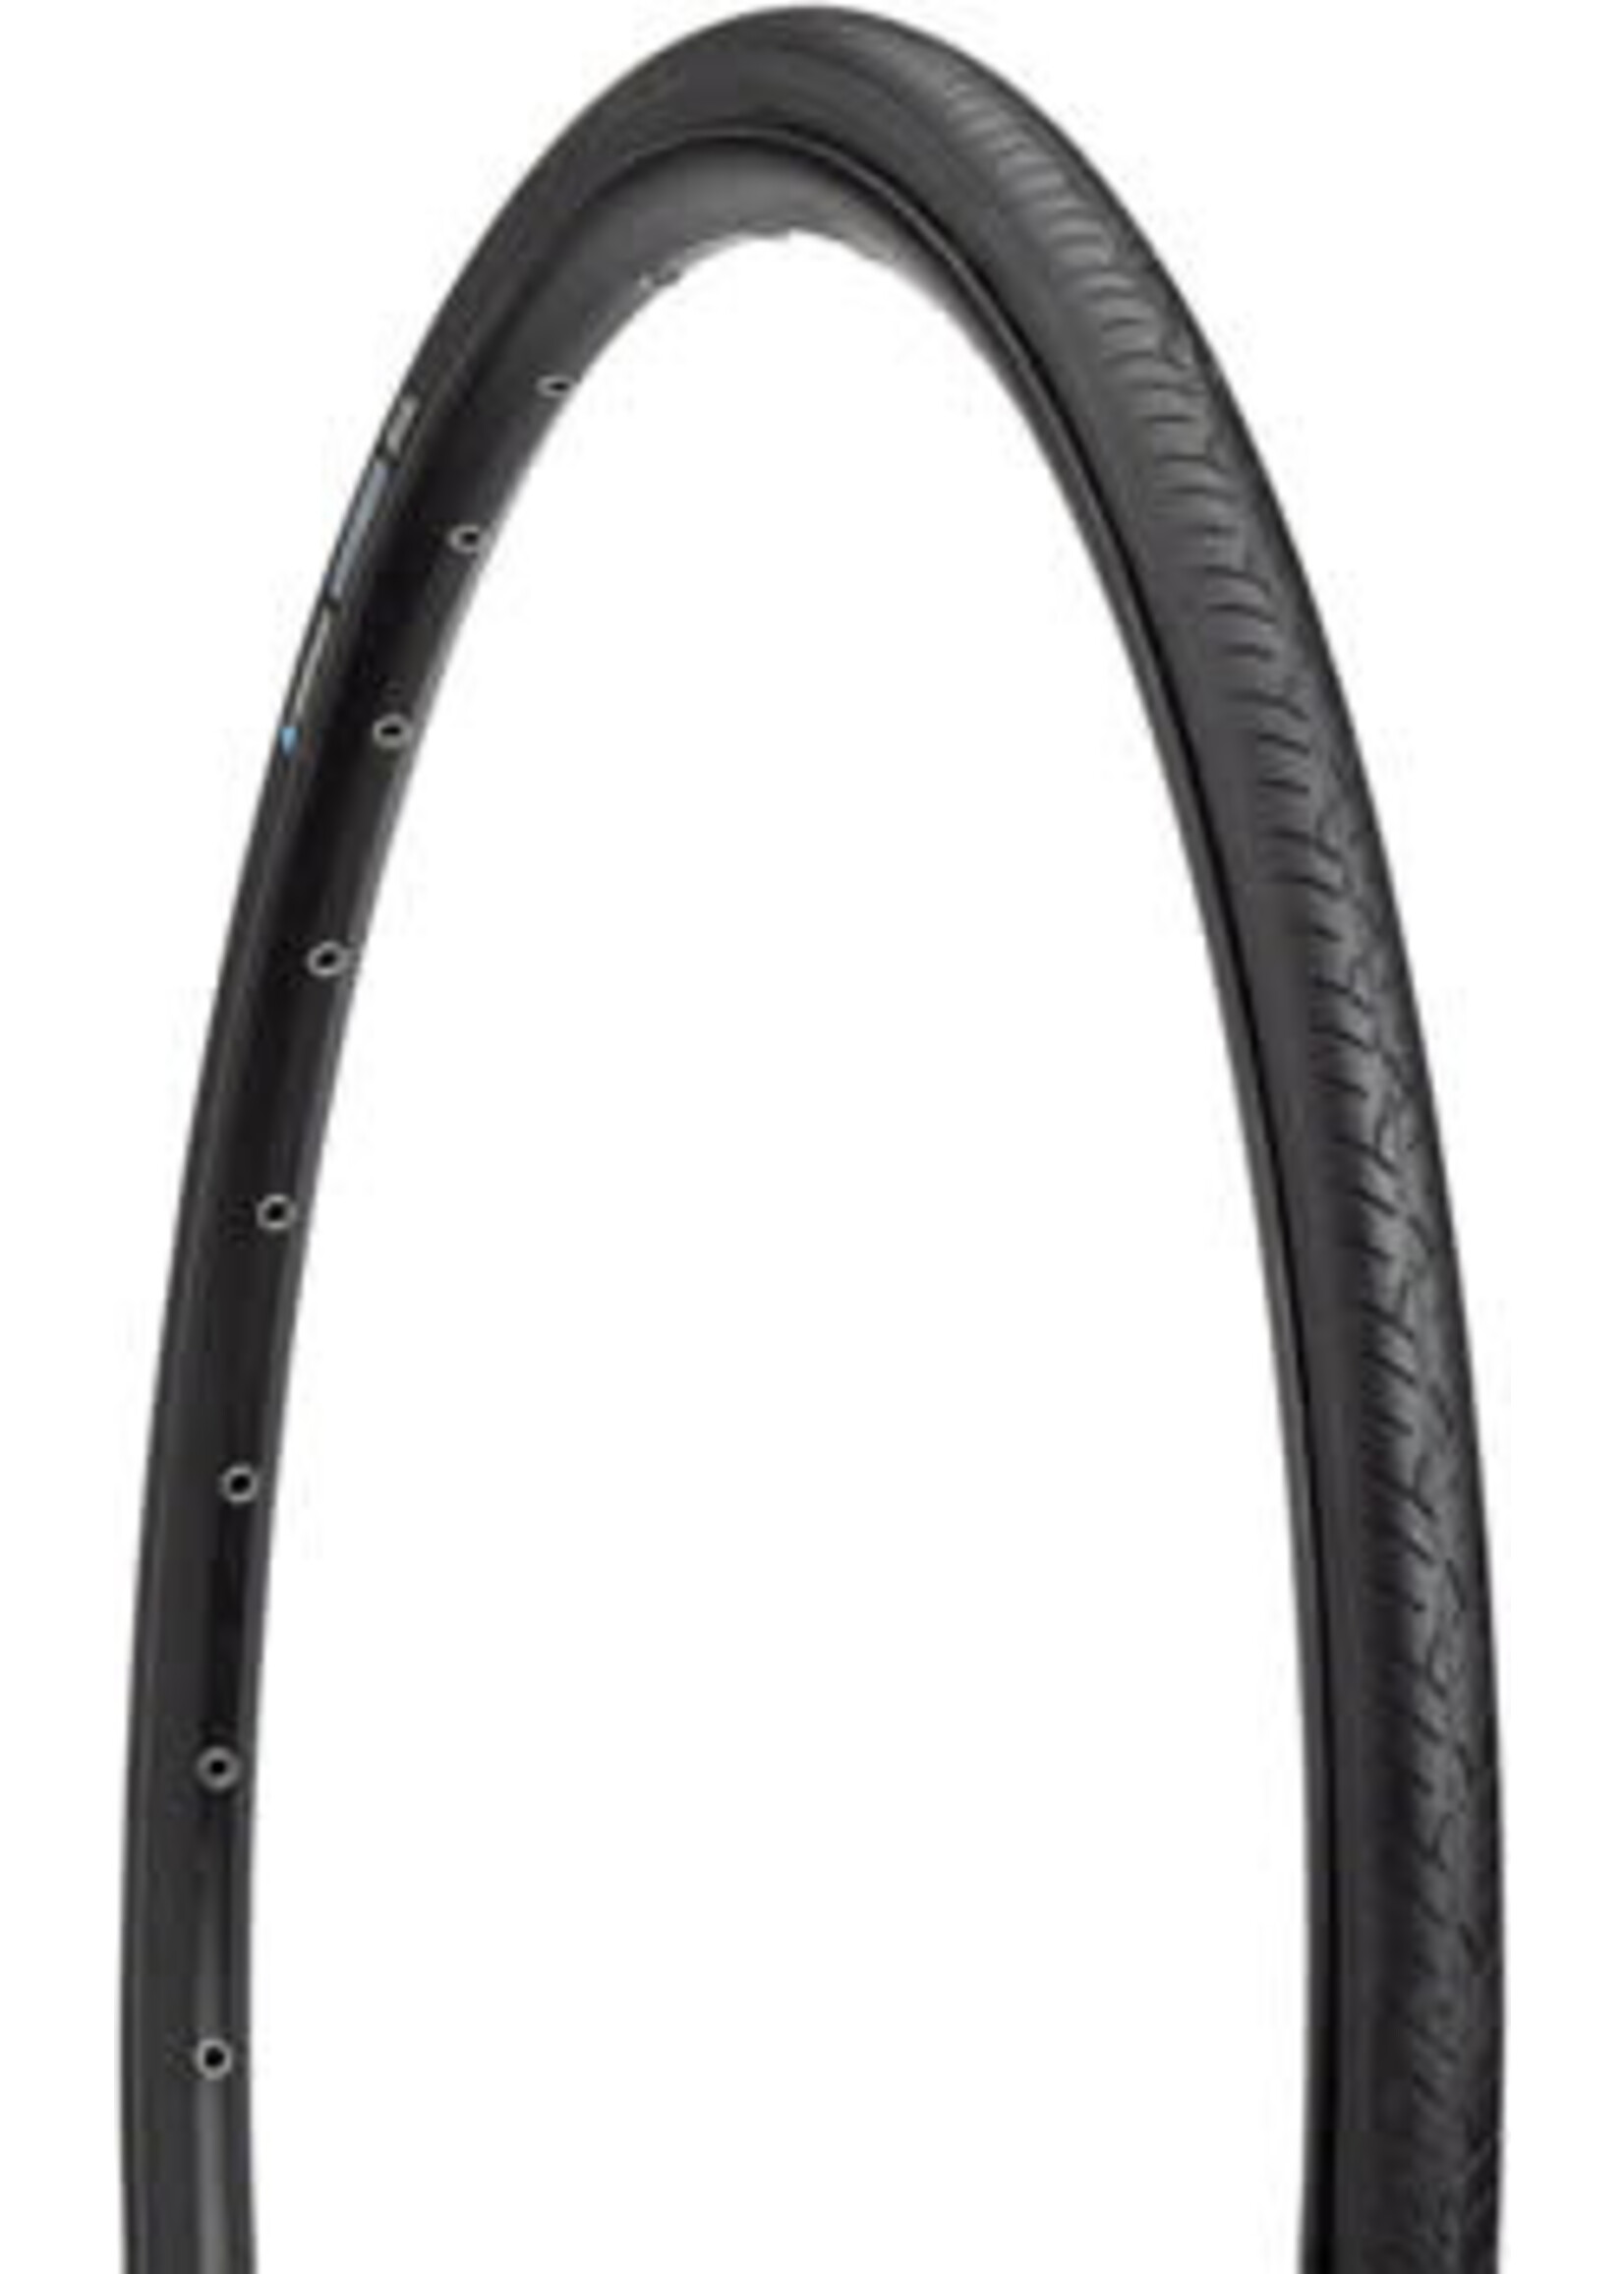 MSW MSW Thunder Road Tire - 700 x 25, Wirebead, Black